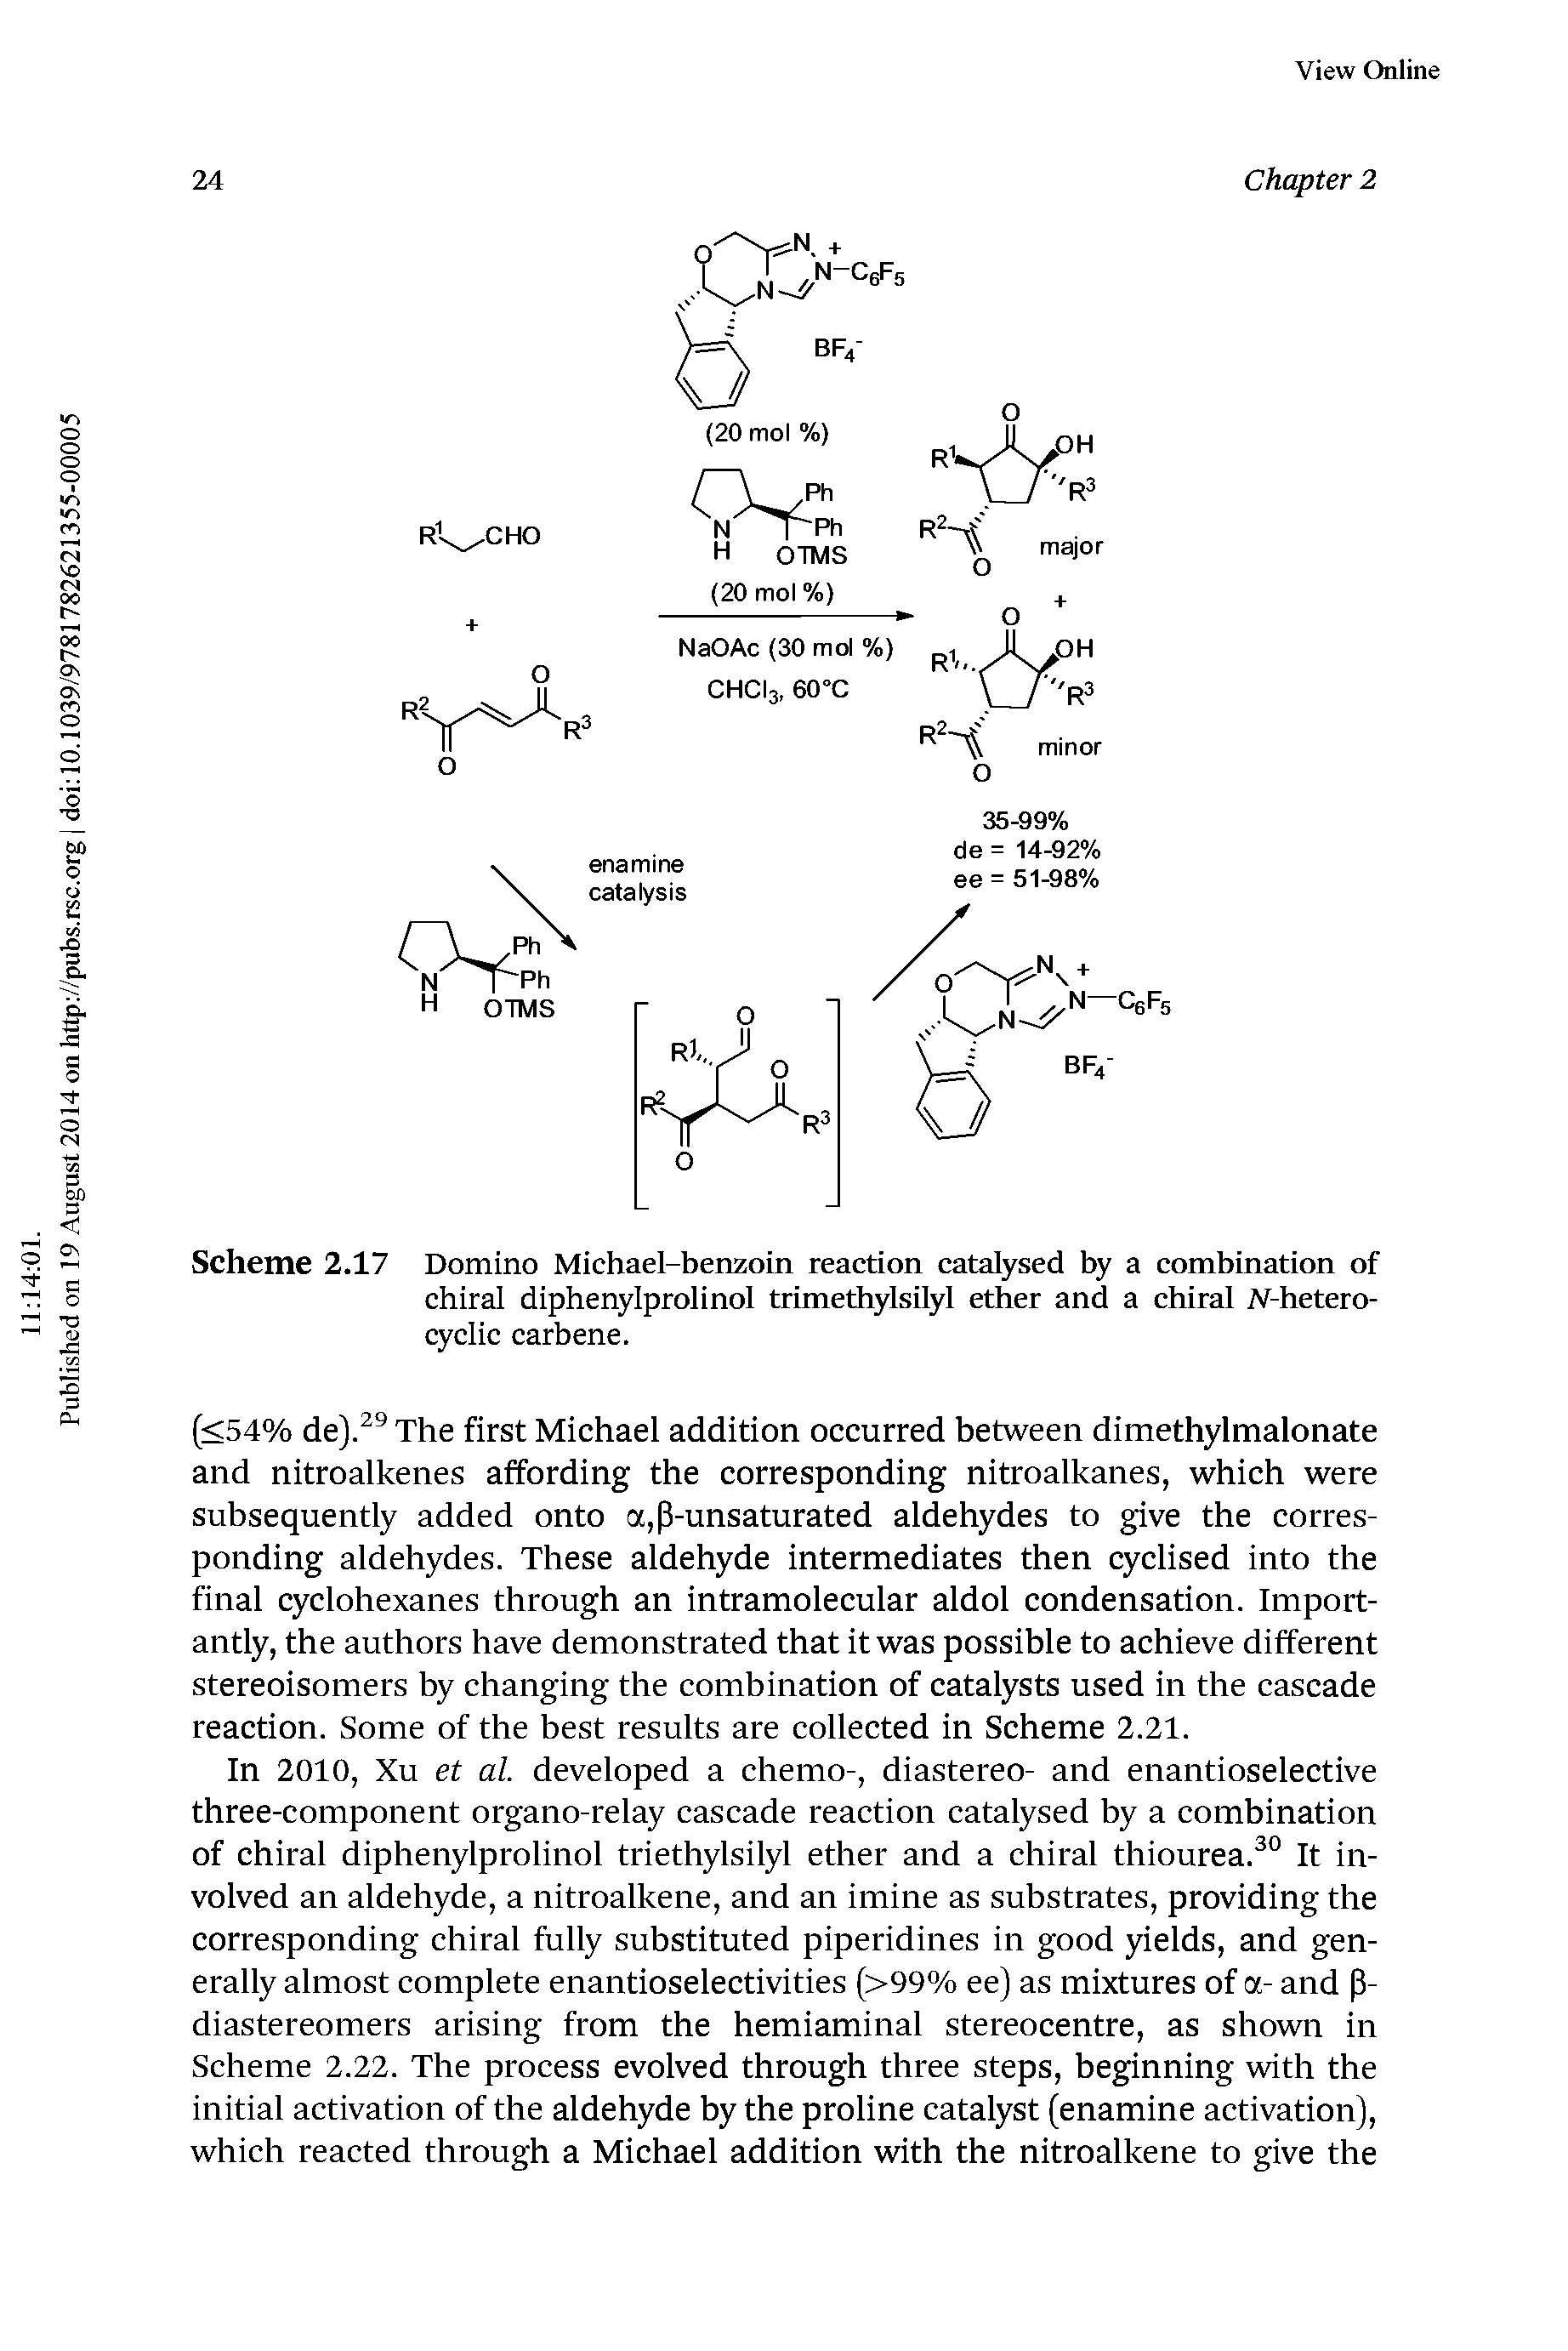 Scheme 2.17 Domino Michael-benzoin reaction catalysed by a combination of chiral diphenylprolinol trimethylsilyl ether and a chiral N-hetero-cyclic carbene.